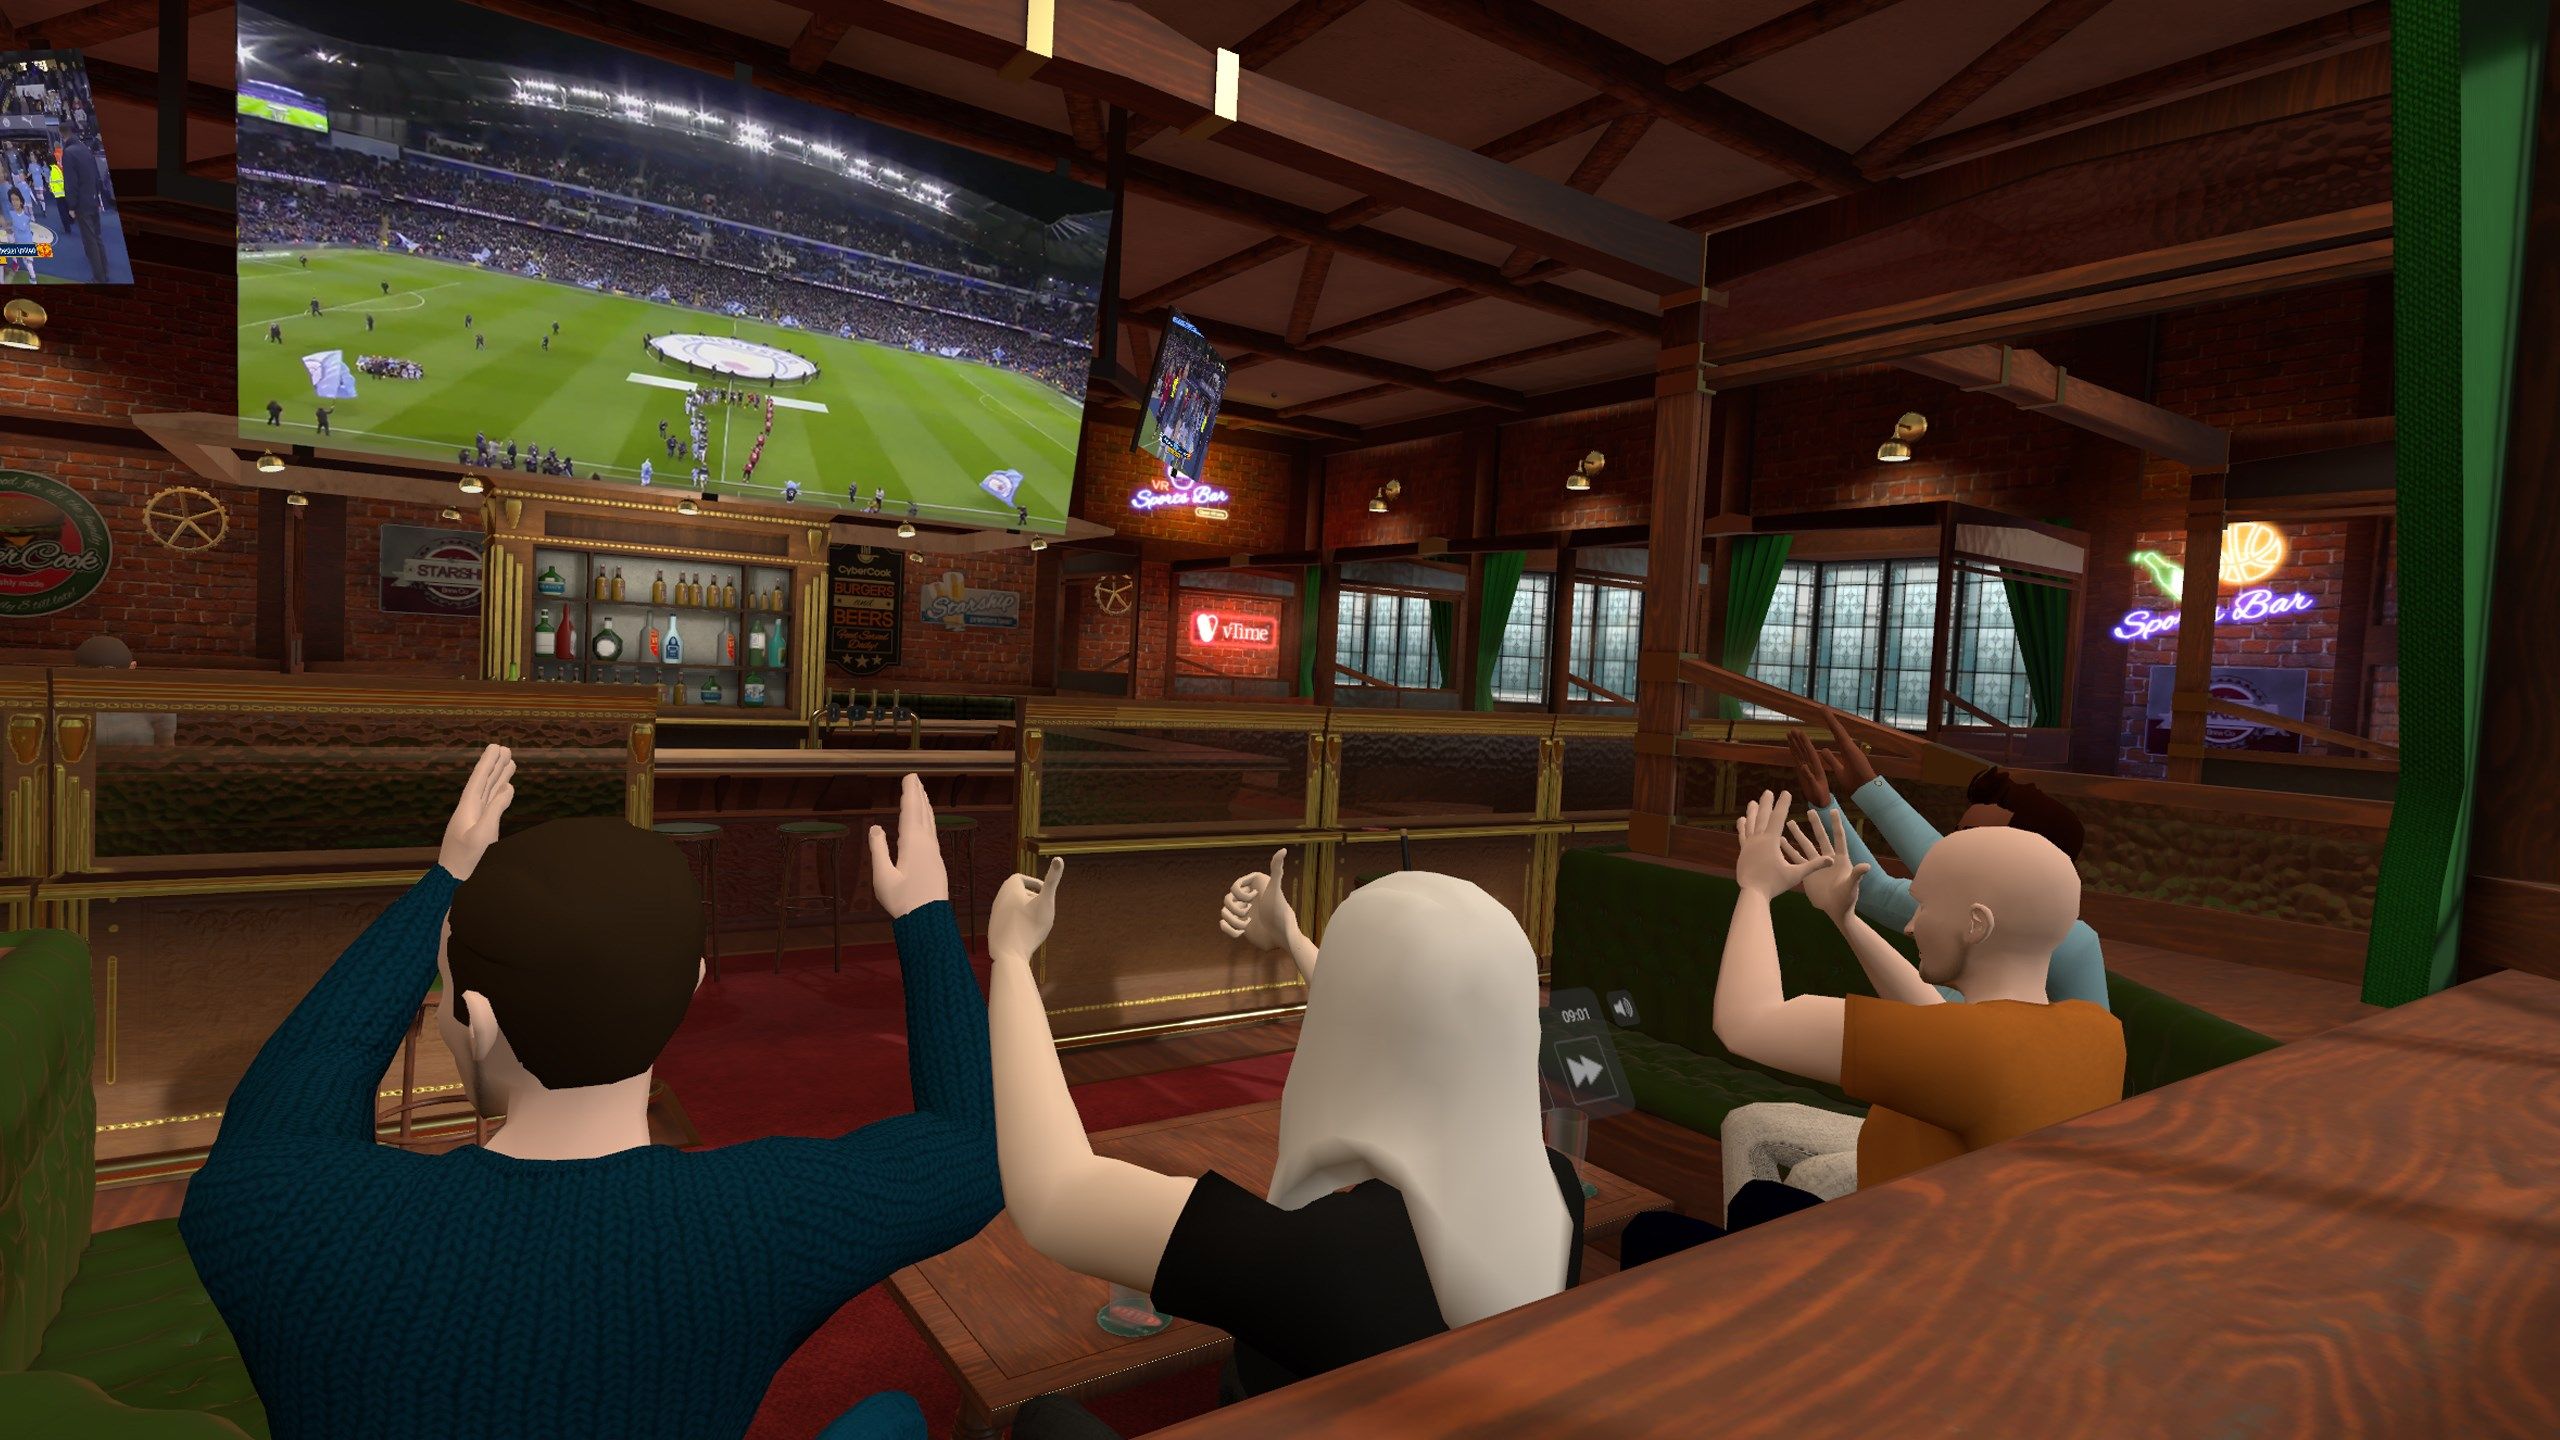 Watch exciting video content with friends in vTime XR Theaters such as the Sports Bar and Video Bowl!